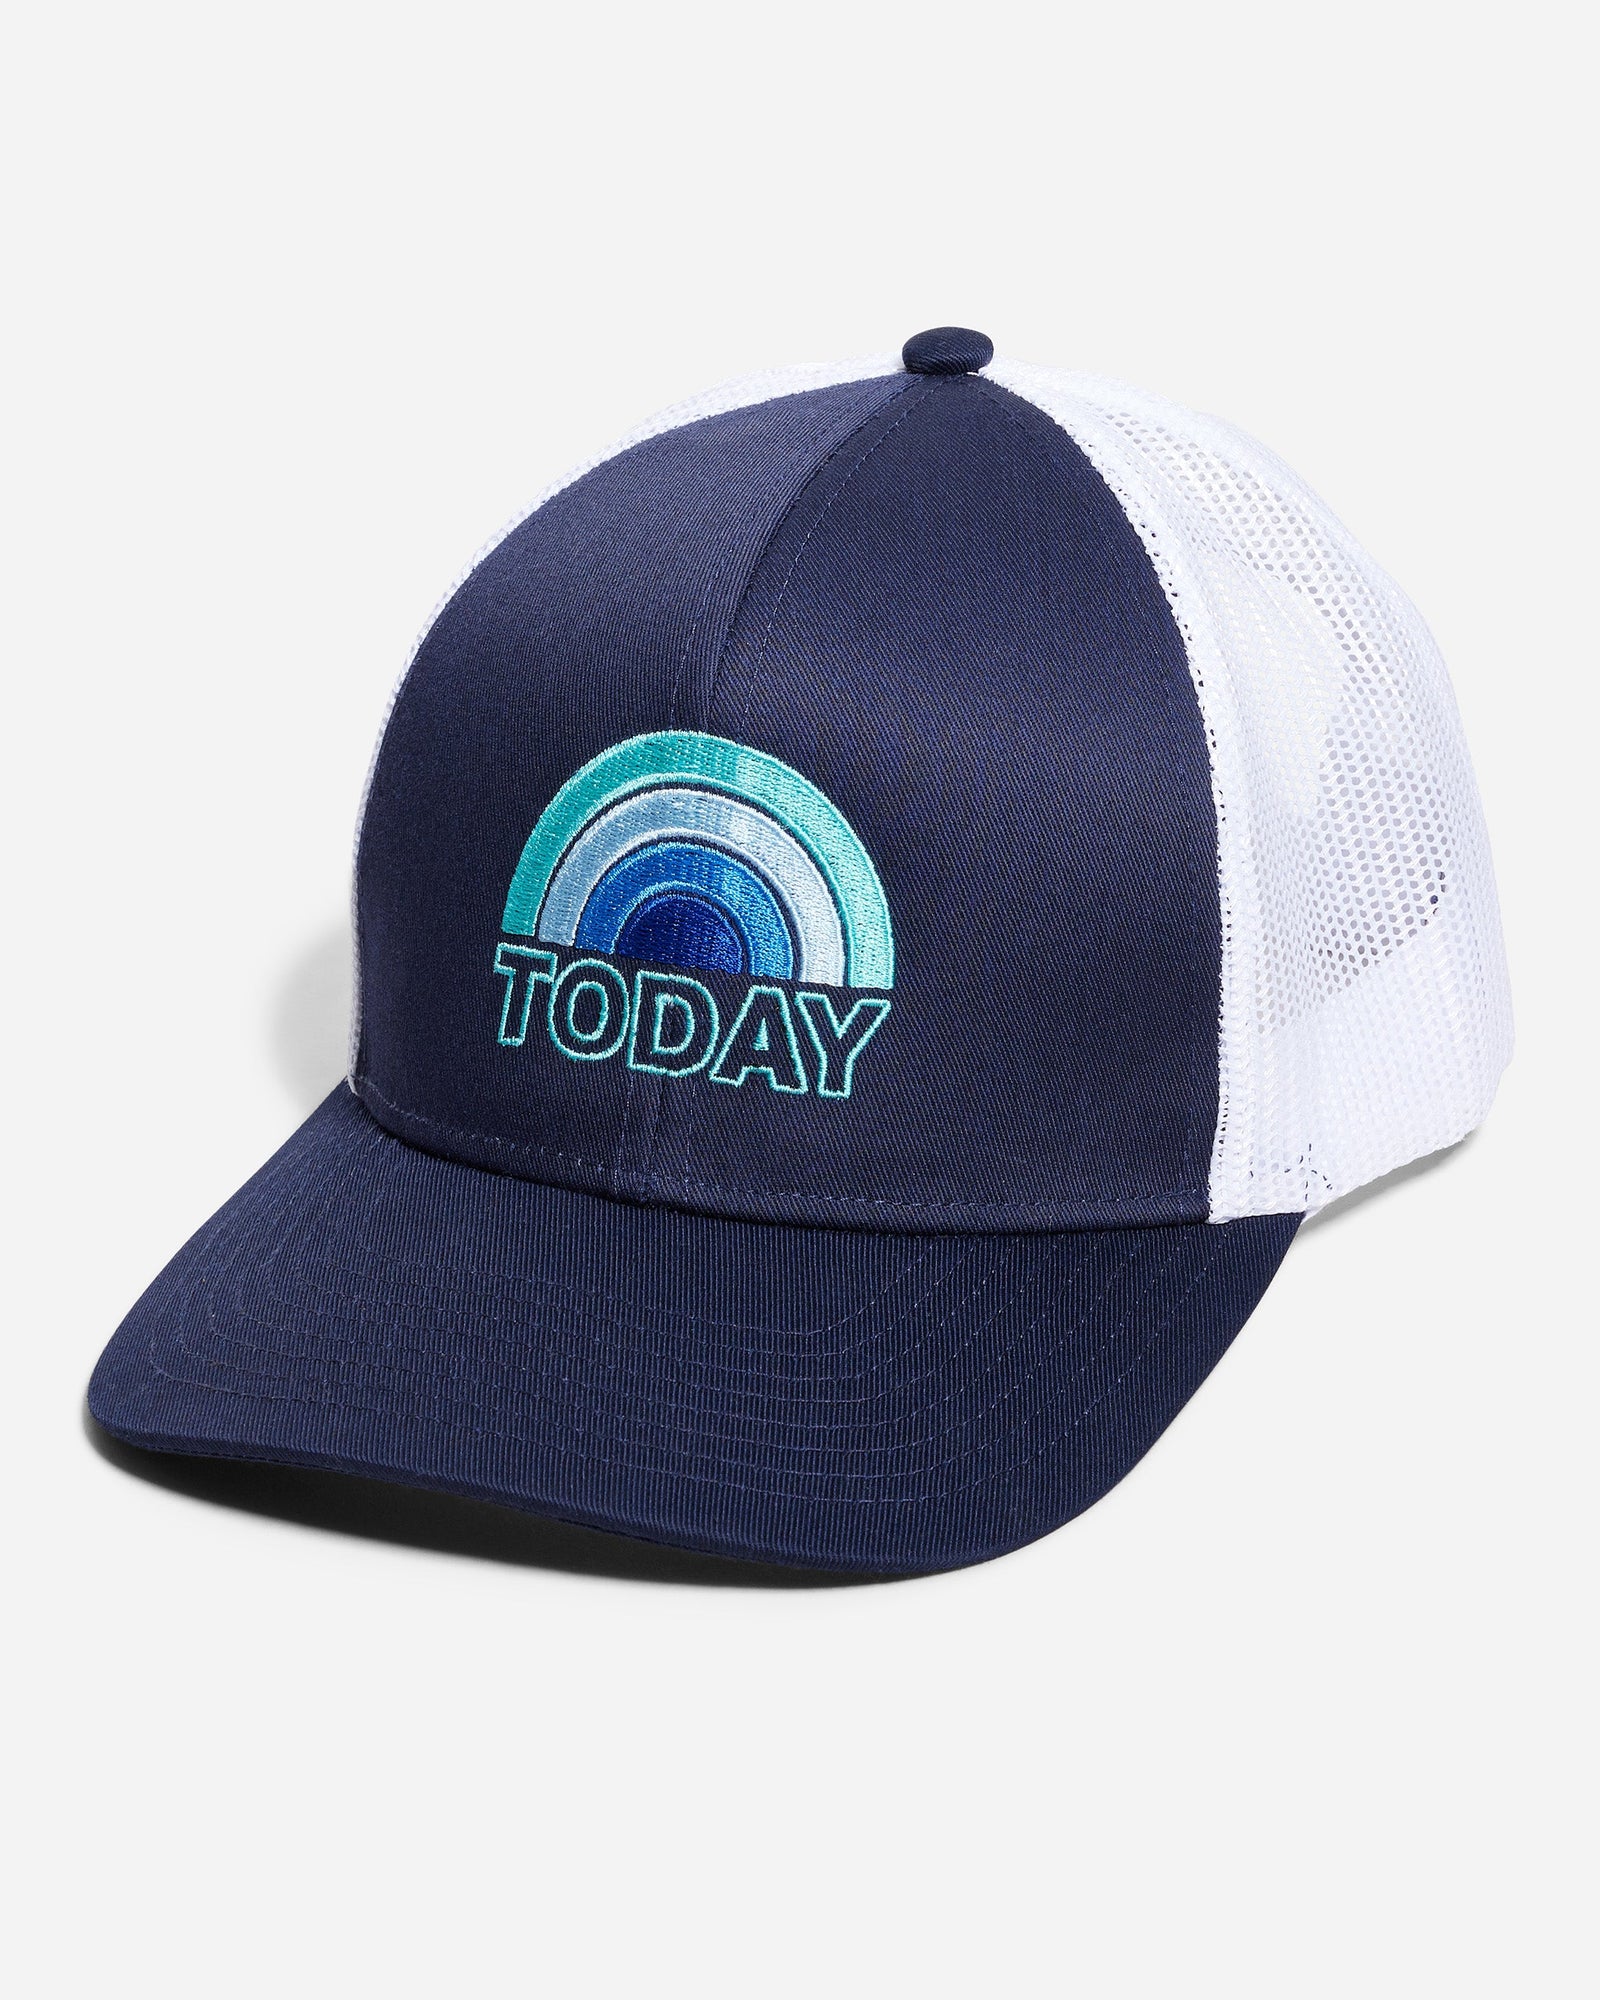 TODAY Logo Embroidered Trucker Hats